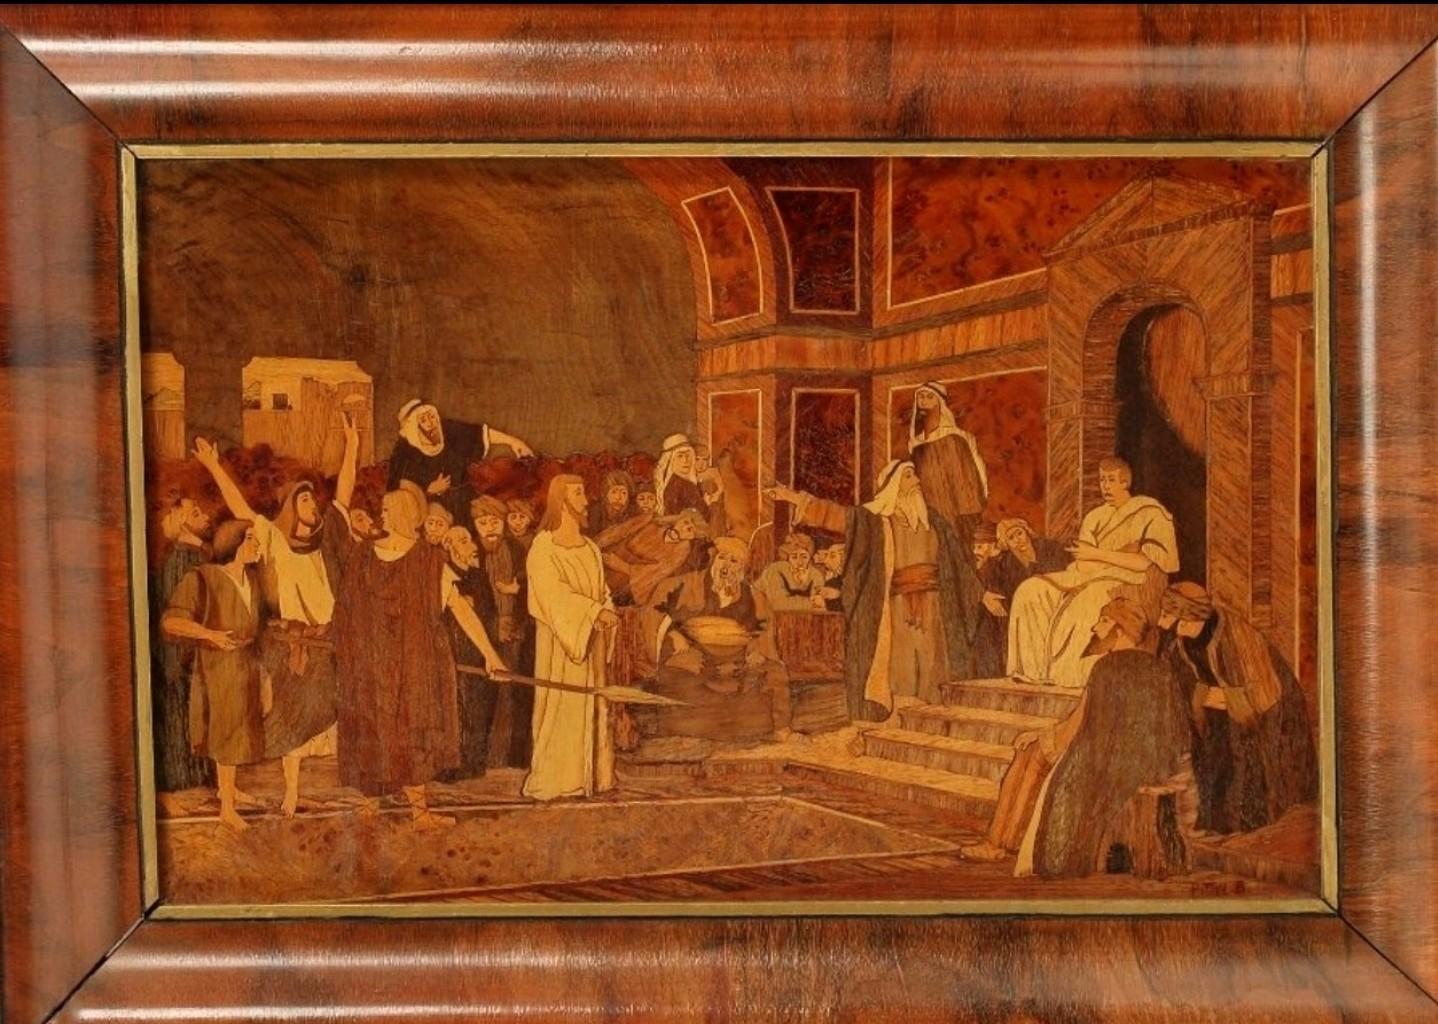 A rare and most impressive, exquisitely hand-crafted marquetry plaque, early 20th century, exceptionally executed masterpiece, intricately inlaid exotic woods depicting Christ in front of Pilate, after Mihaly Munkacsy (Hungarian, 1844-1900), signed